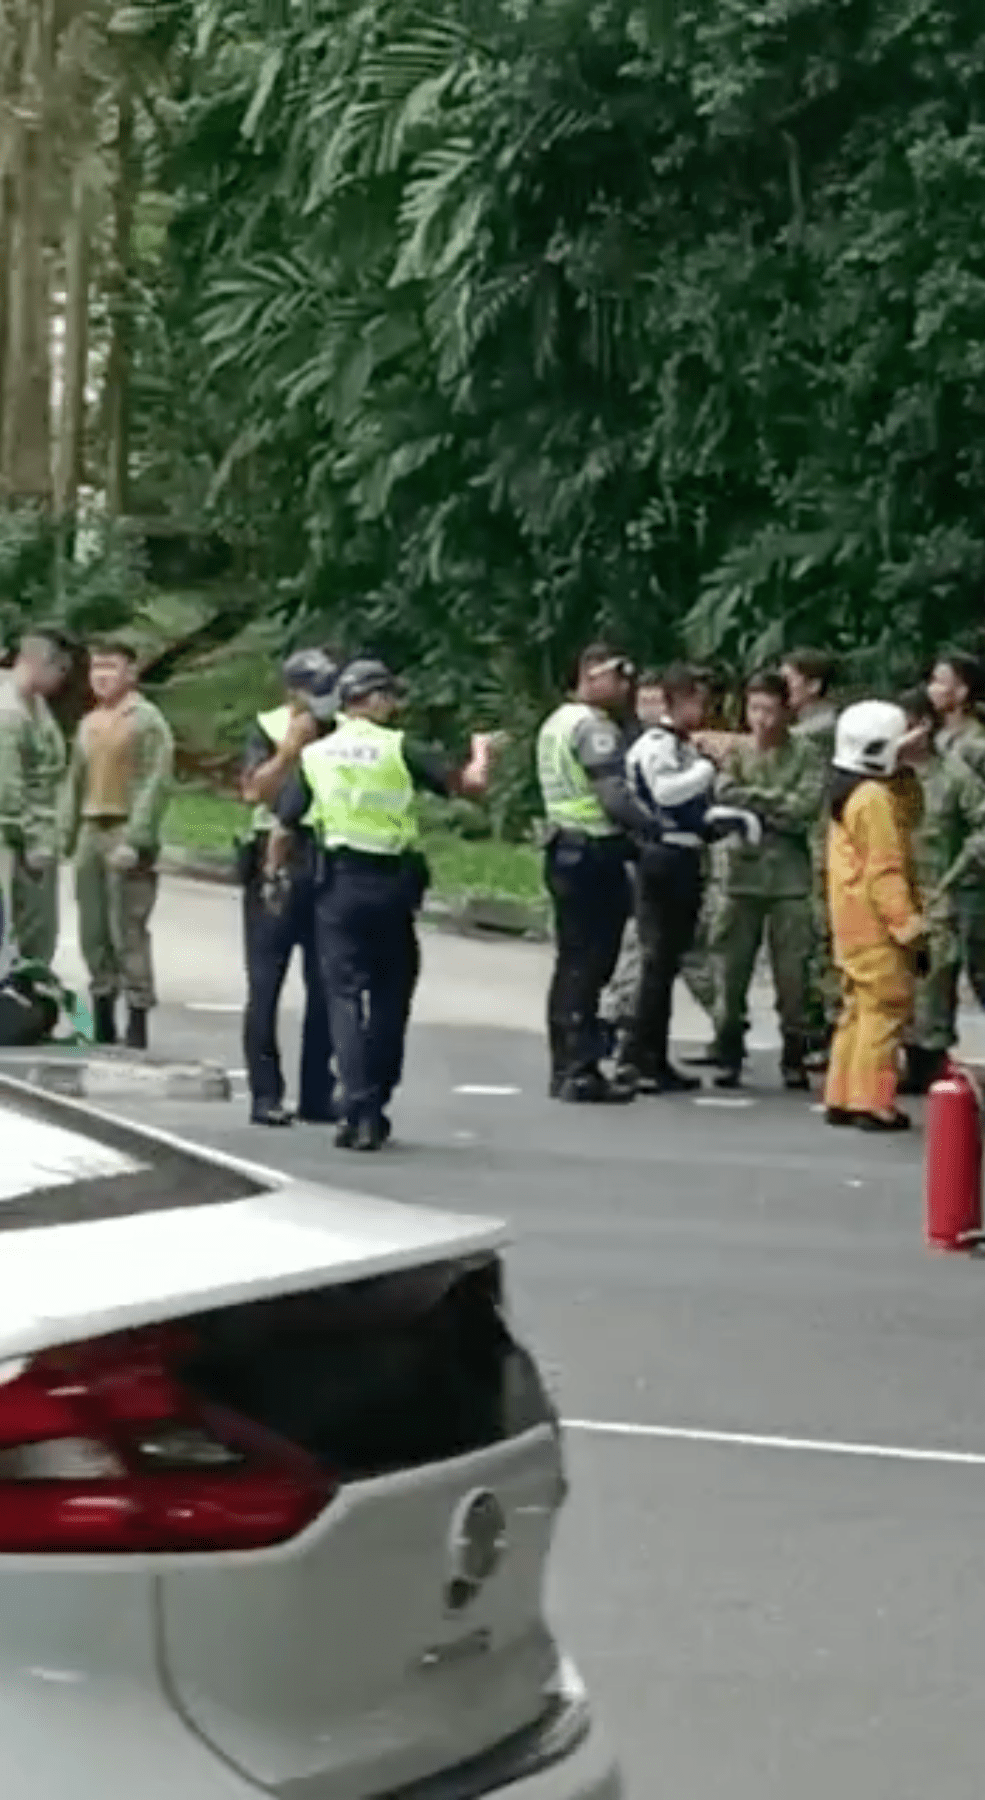 SAF vehicle taxi accident